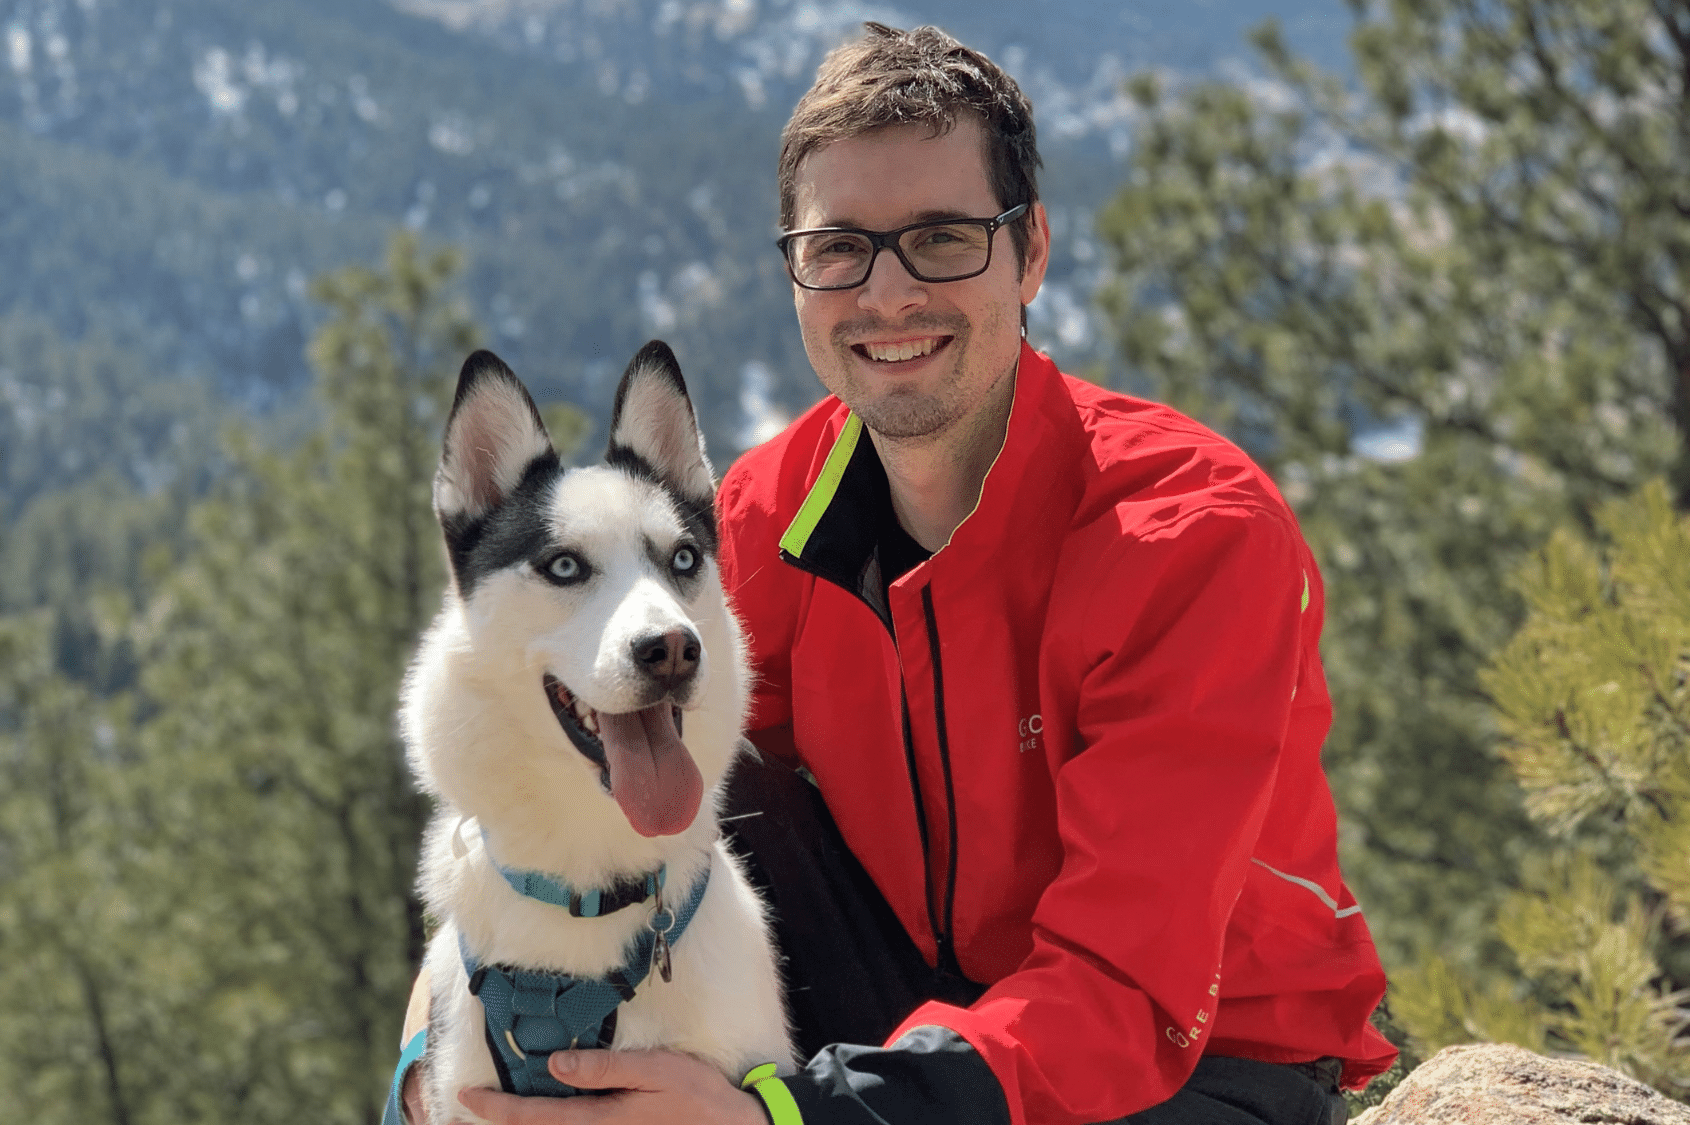 Brett Borzsei Production Manager at Columbine Label Company with his husky on a walk in the mountains.